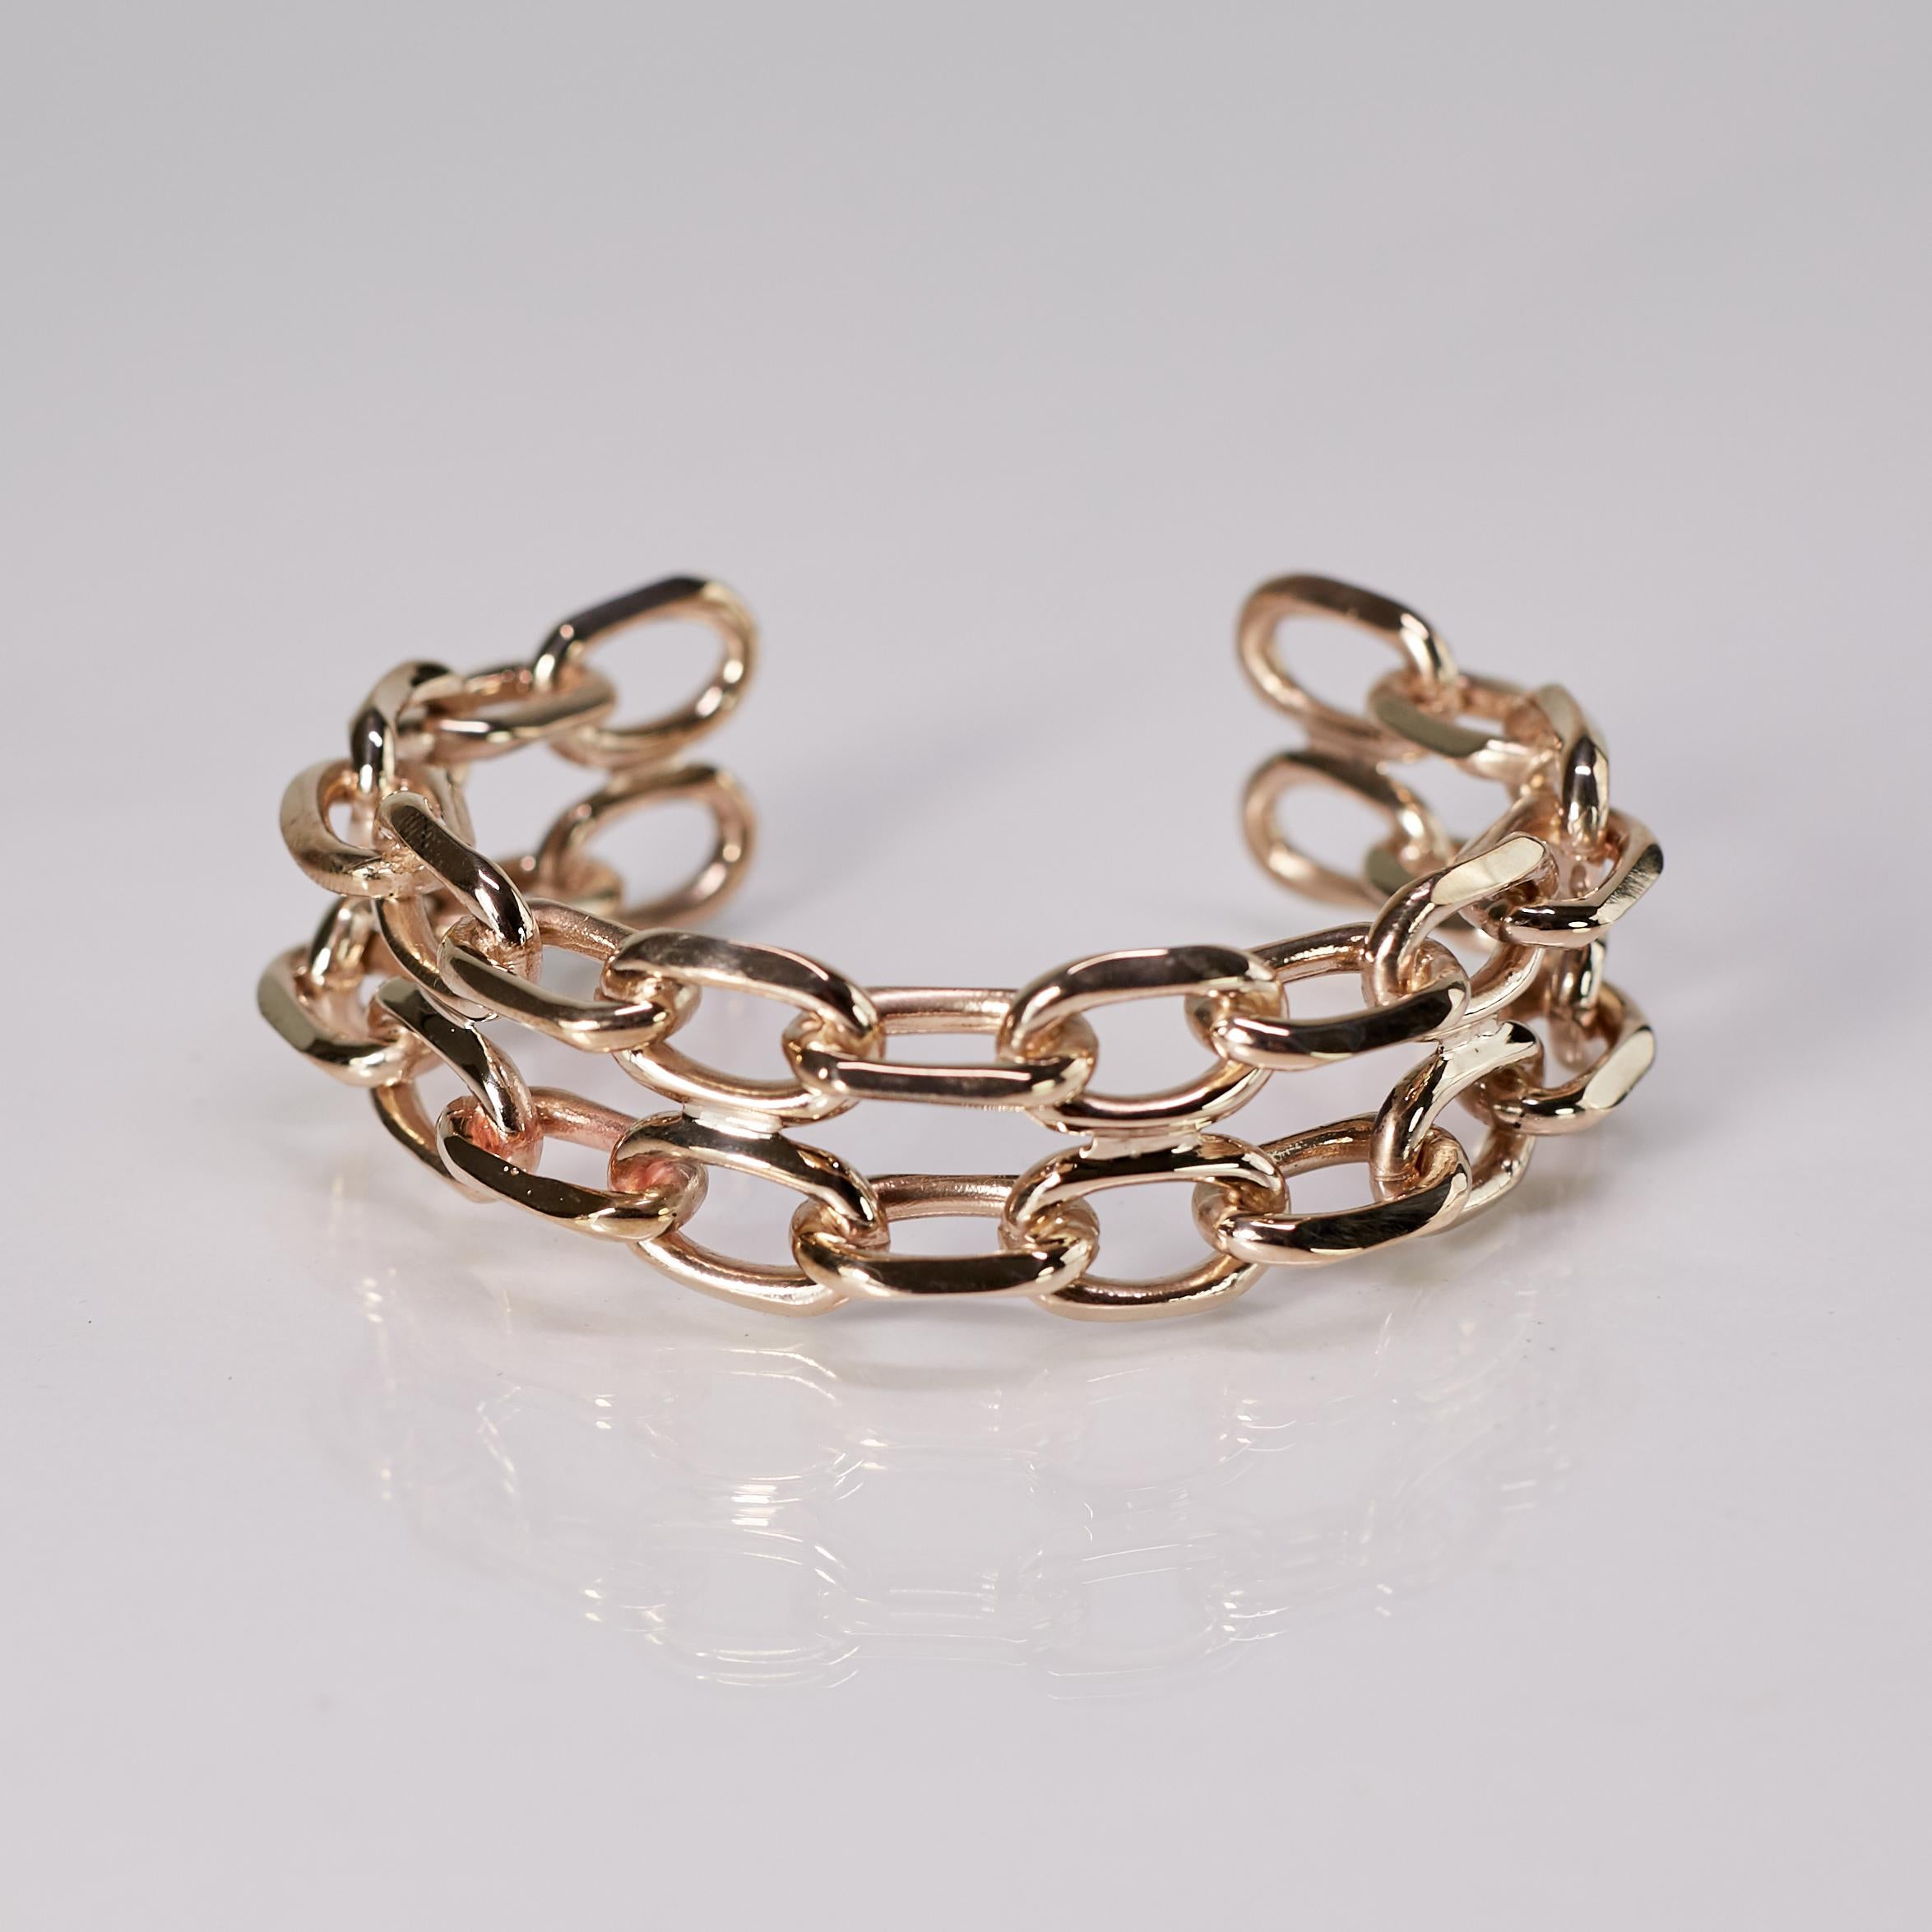 Contemporary Chain Cuff Bangle Bracelet Gold Plated Brass Statement Piece J Dauphin For Sale